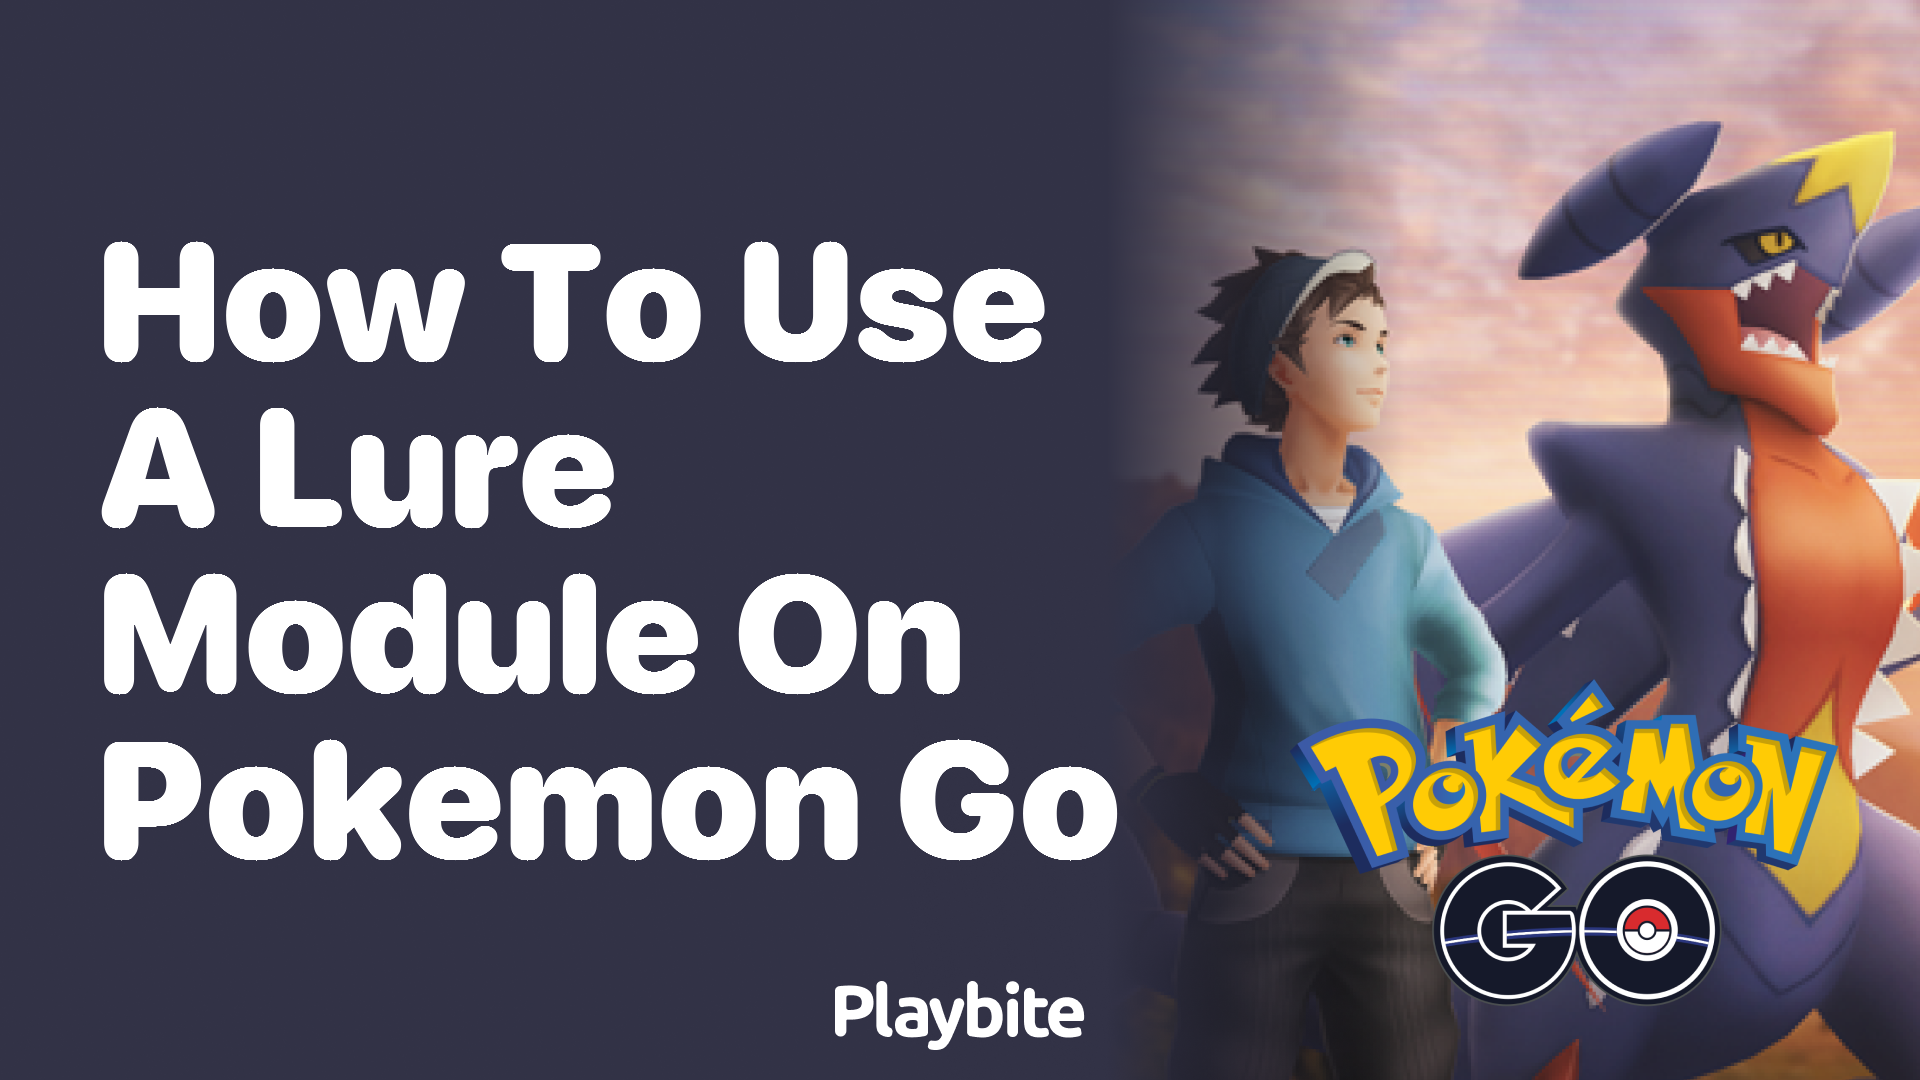 How to Use a Lure Module on Pokemon GO - Playbite